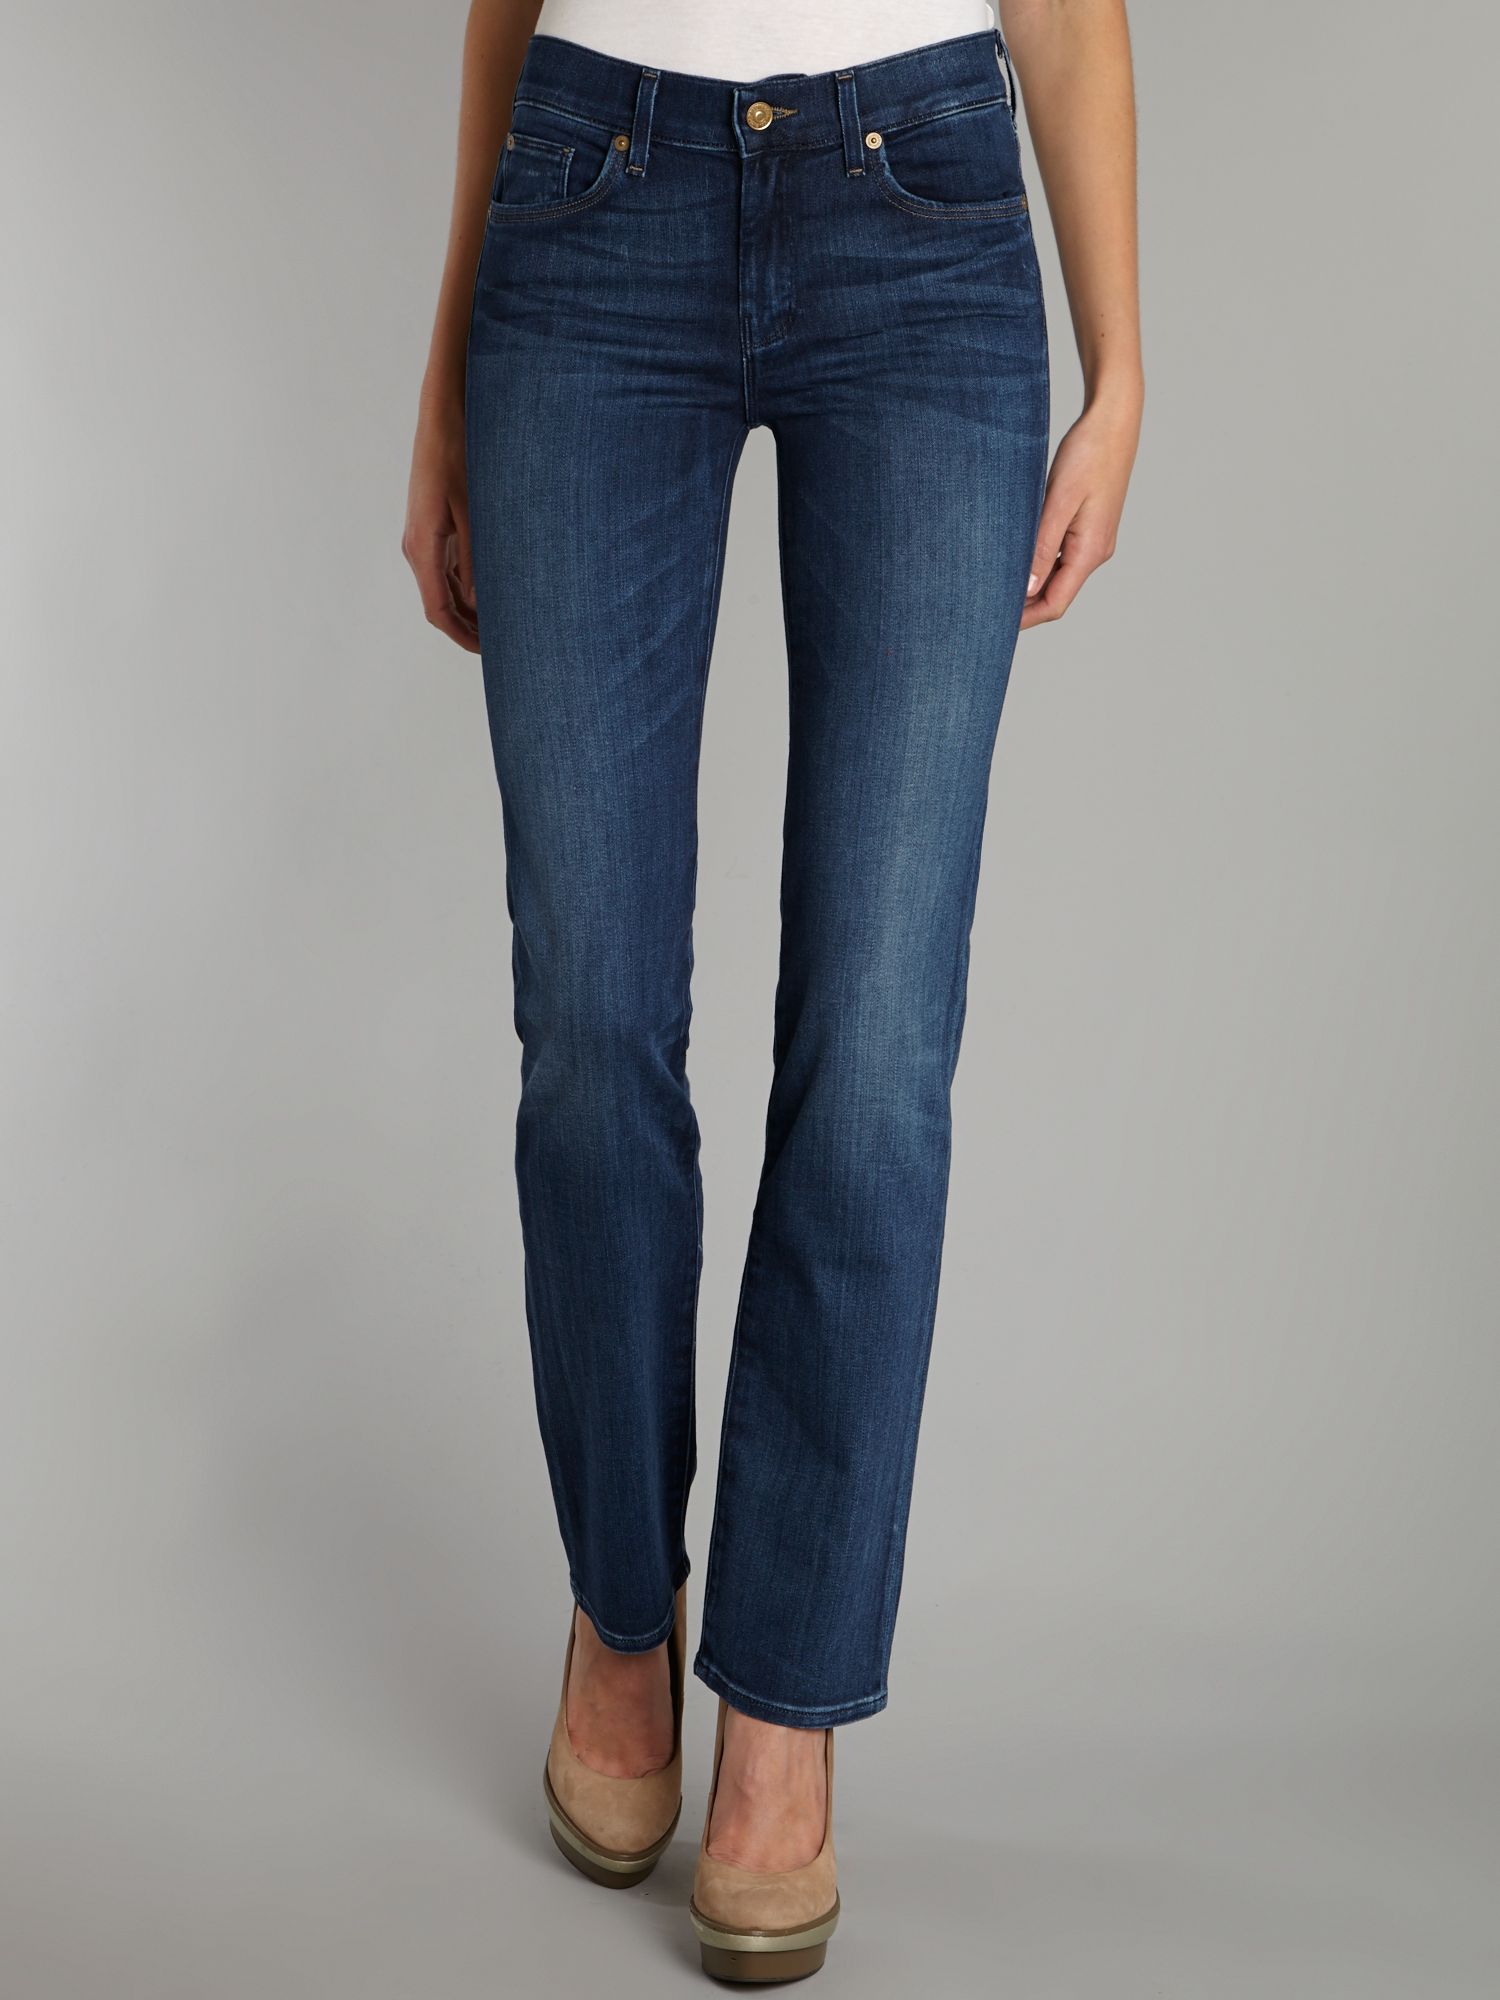 7 for all mankind High Waist Straight Leg Jeans in Pacific Shadows in ...